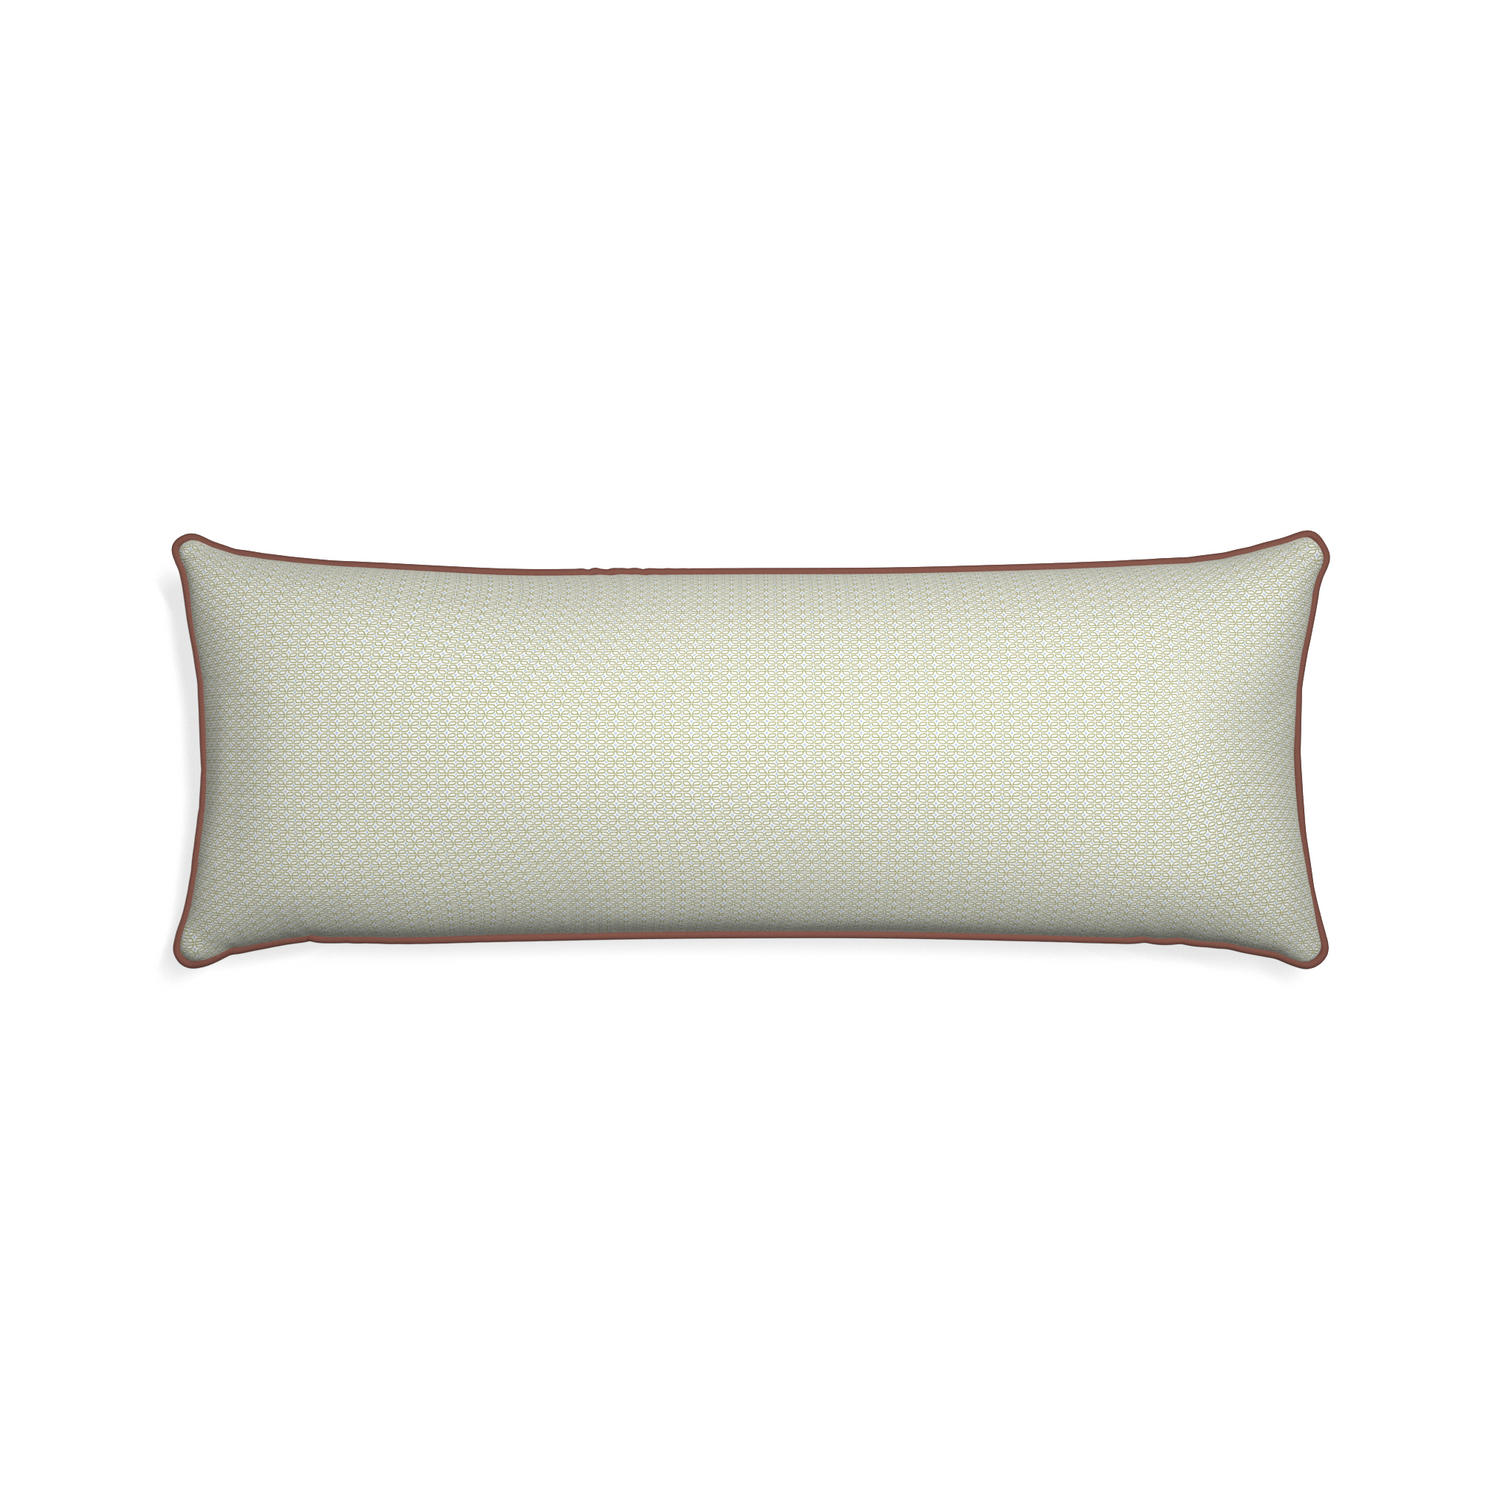 Xl-lumbar loomi moss custom moss green geometricpillow with w piping on white background